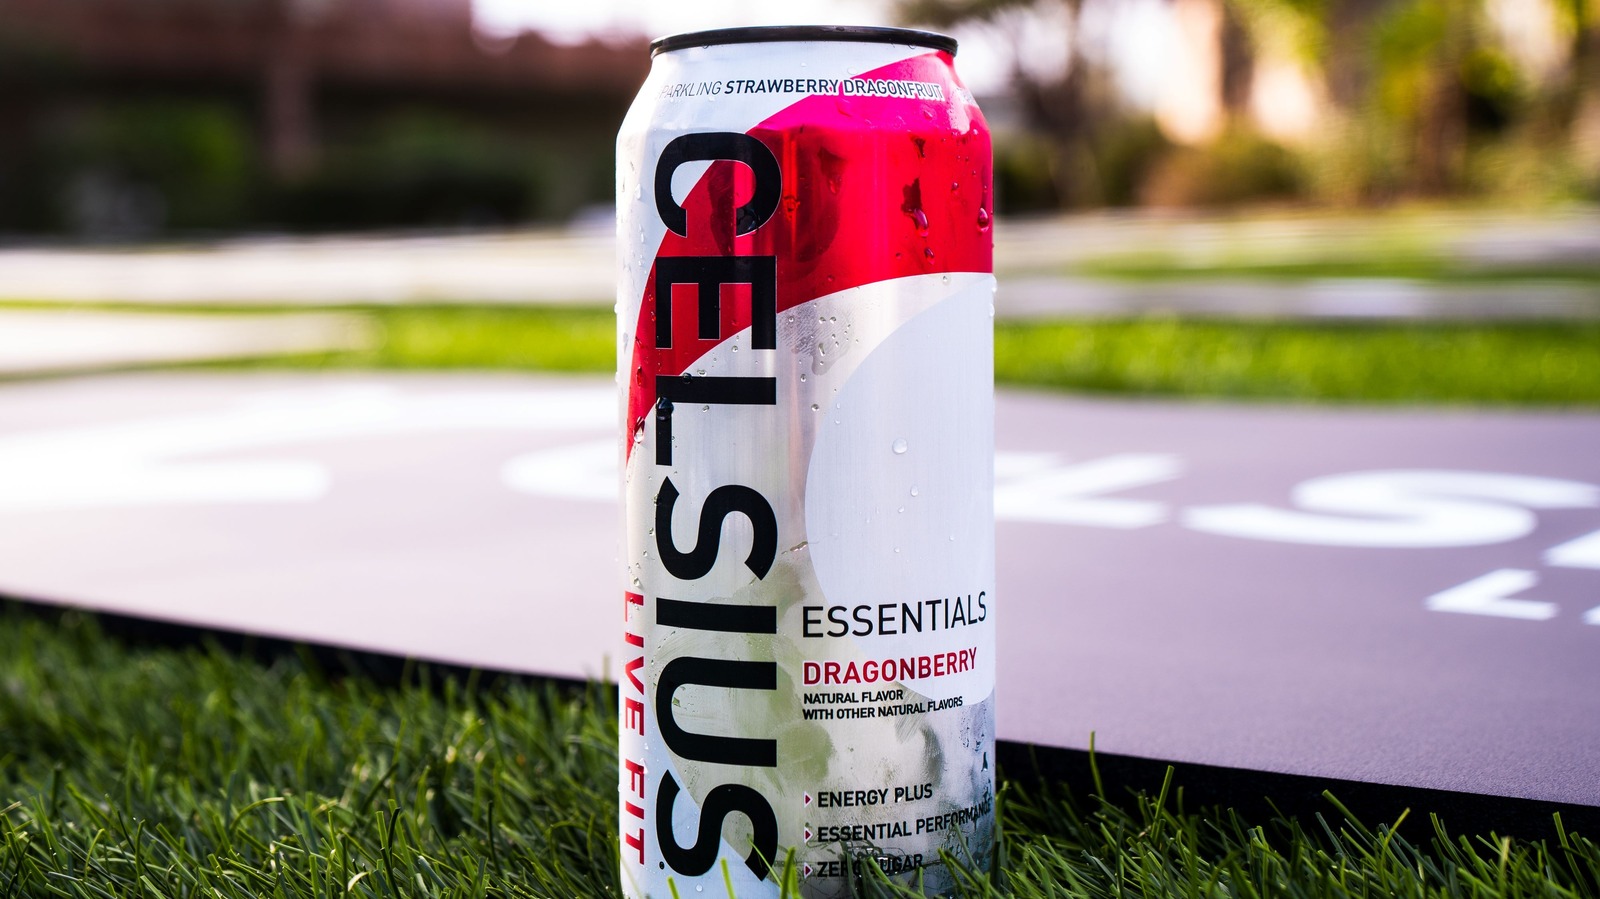 https://www.tastingtable.com/img/gallery/celsius-is-bringing-energy-to-college-students-nationwide-with-fit-stops-tour/l-intro-1700234506.jpg